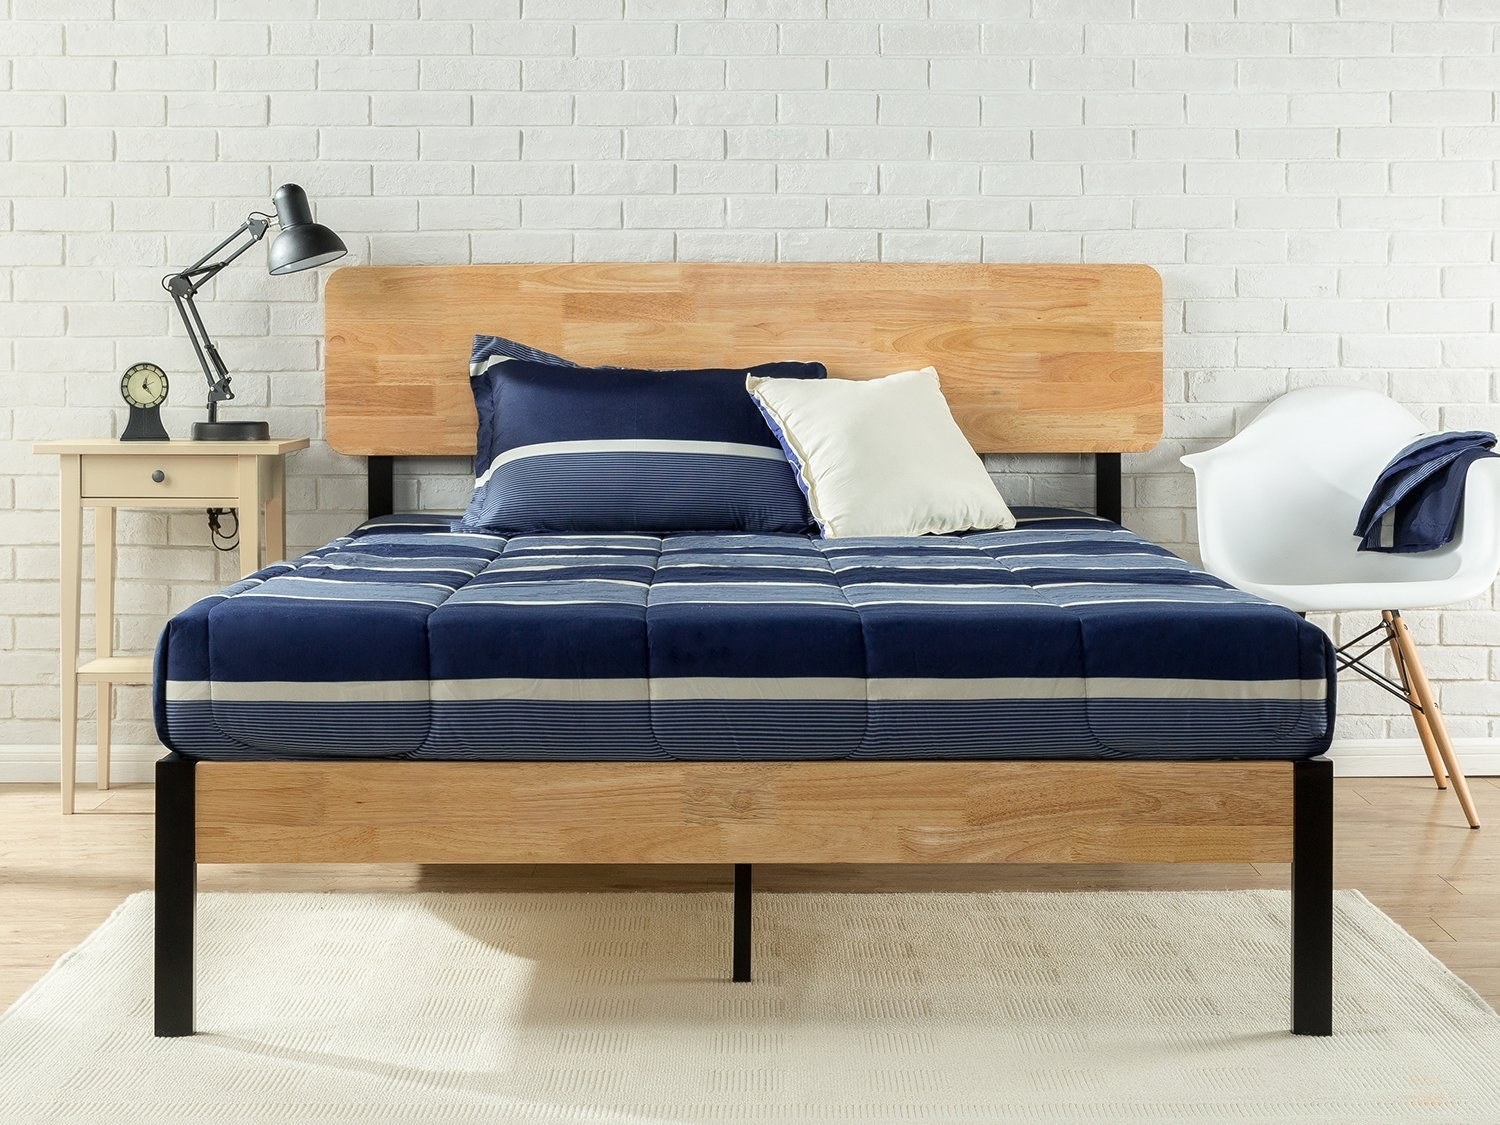 wooden bed frame with navy blue bedding